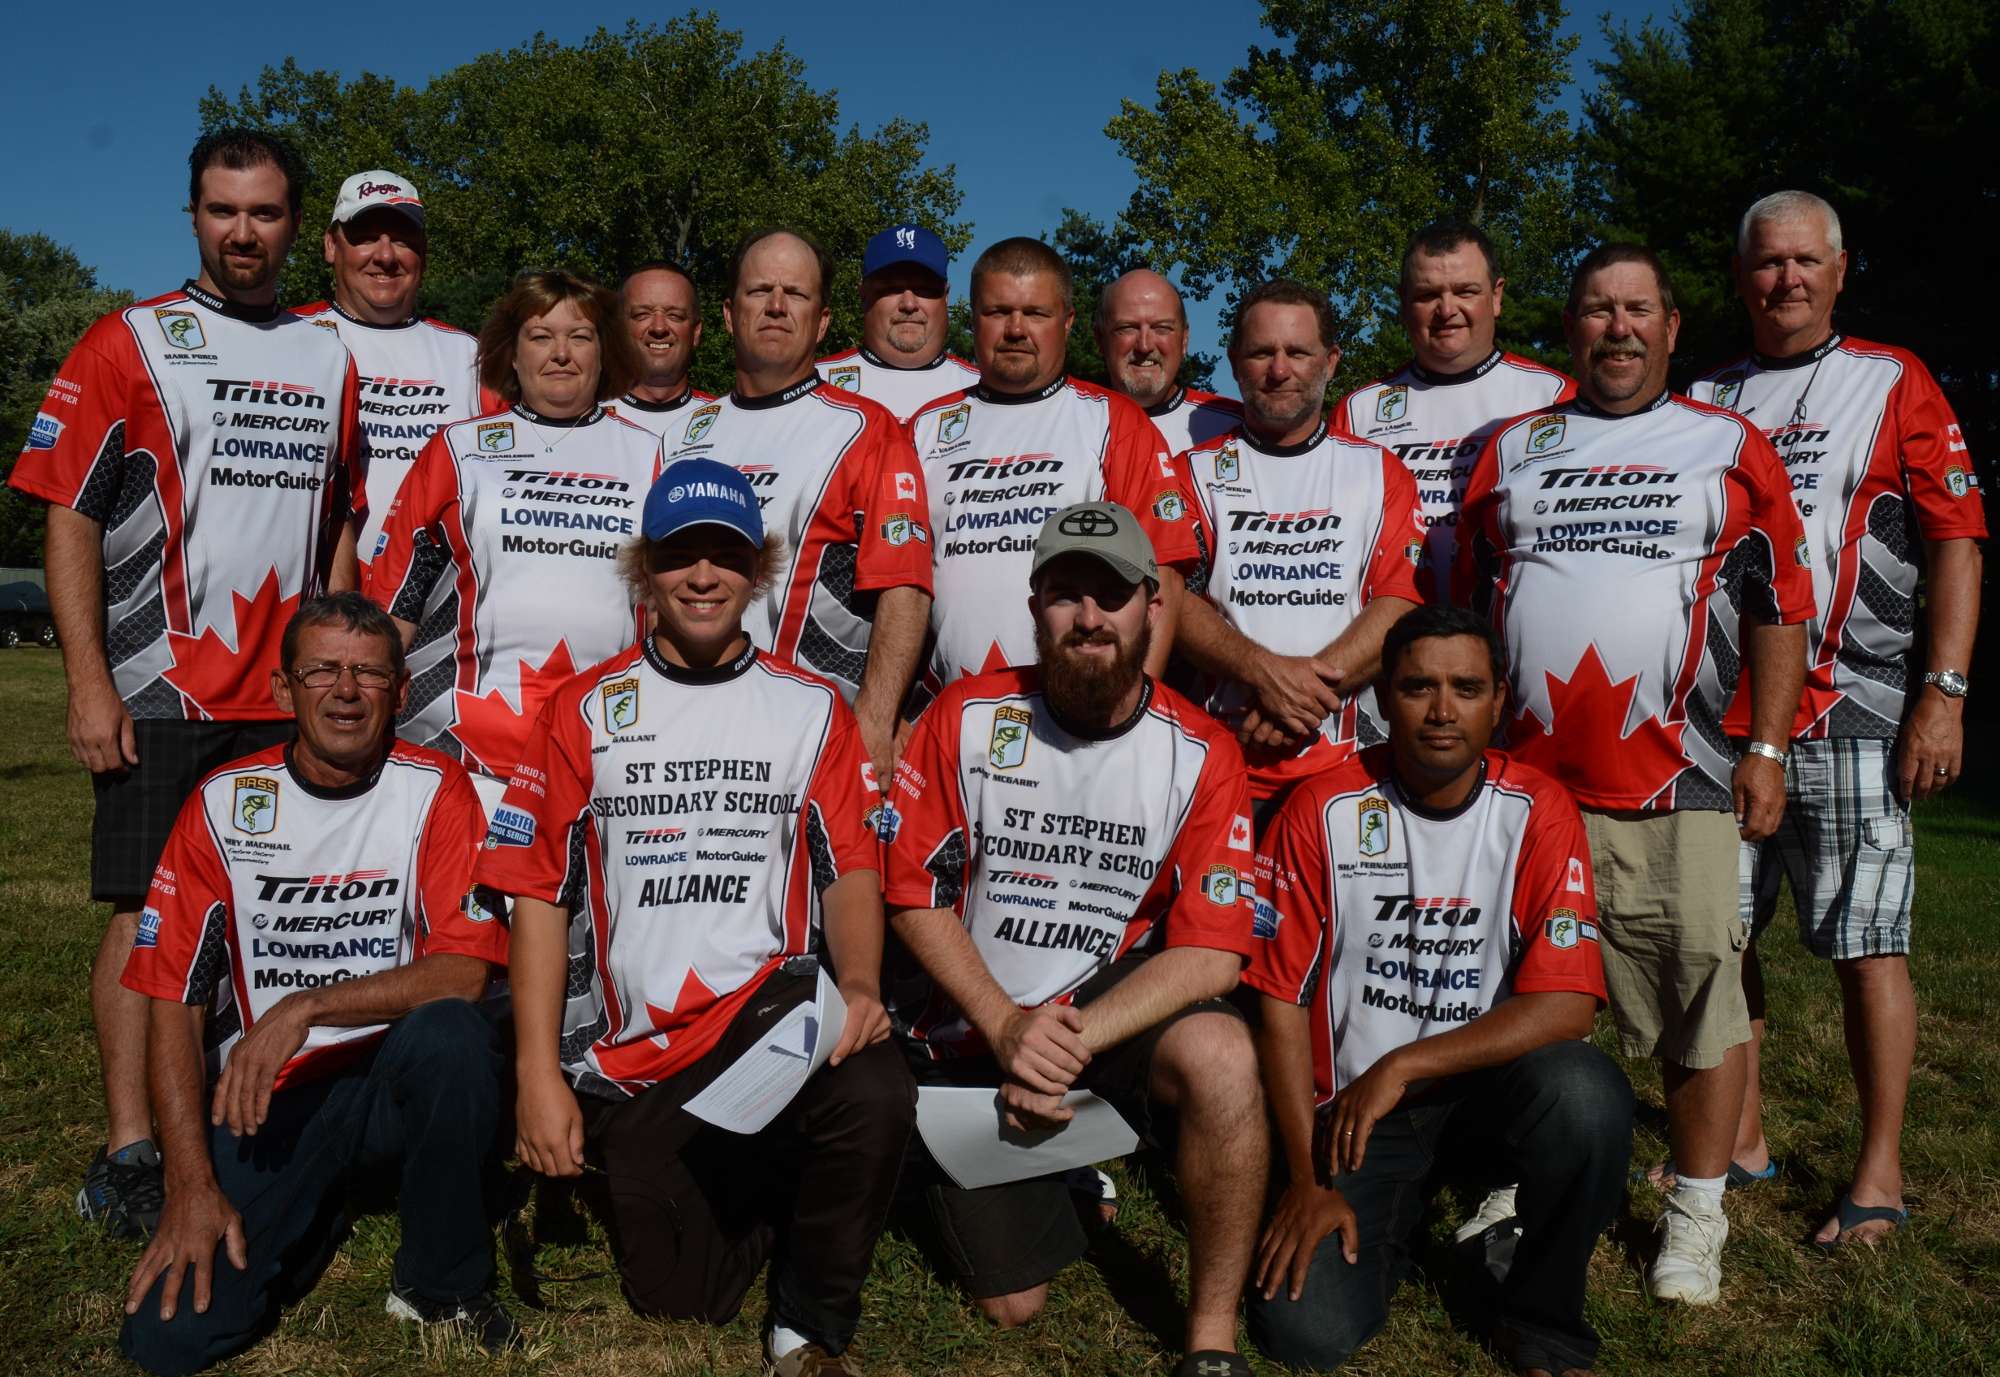 <p><strong>Ontario</strong></p>
<p>Back row: Charles Sim, Patrick Campbell, Dave Spence, Frank Ramsay, John Lamour, Doug Lees</p>
<p>Middle row: Mark Porco, Laurie-Anne Charlebois, Doug Brownridge, Kal Vaisanen, Forrest Weiller, Bob Thornington</p>
<p>Front row: Larry MacPhail, Cooper Gallant, Danny McGarry, Shane Fernandez</p>
